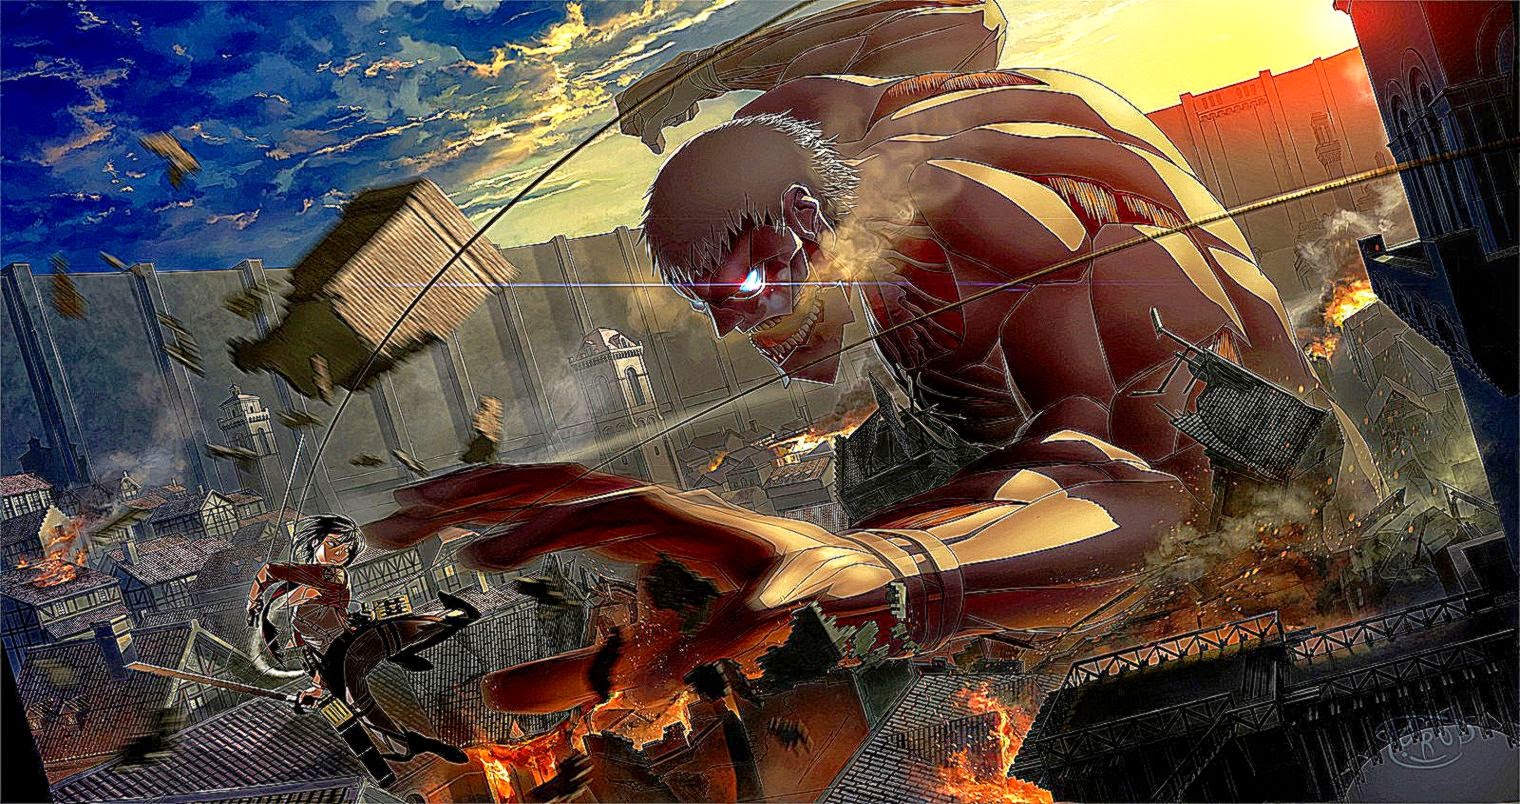  Attack On Titan Wallpapers Attack On Titan Backgrounds